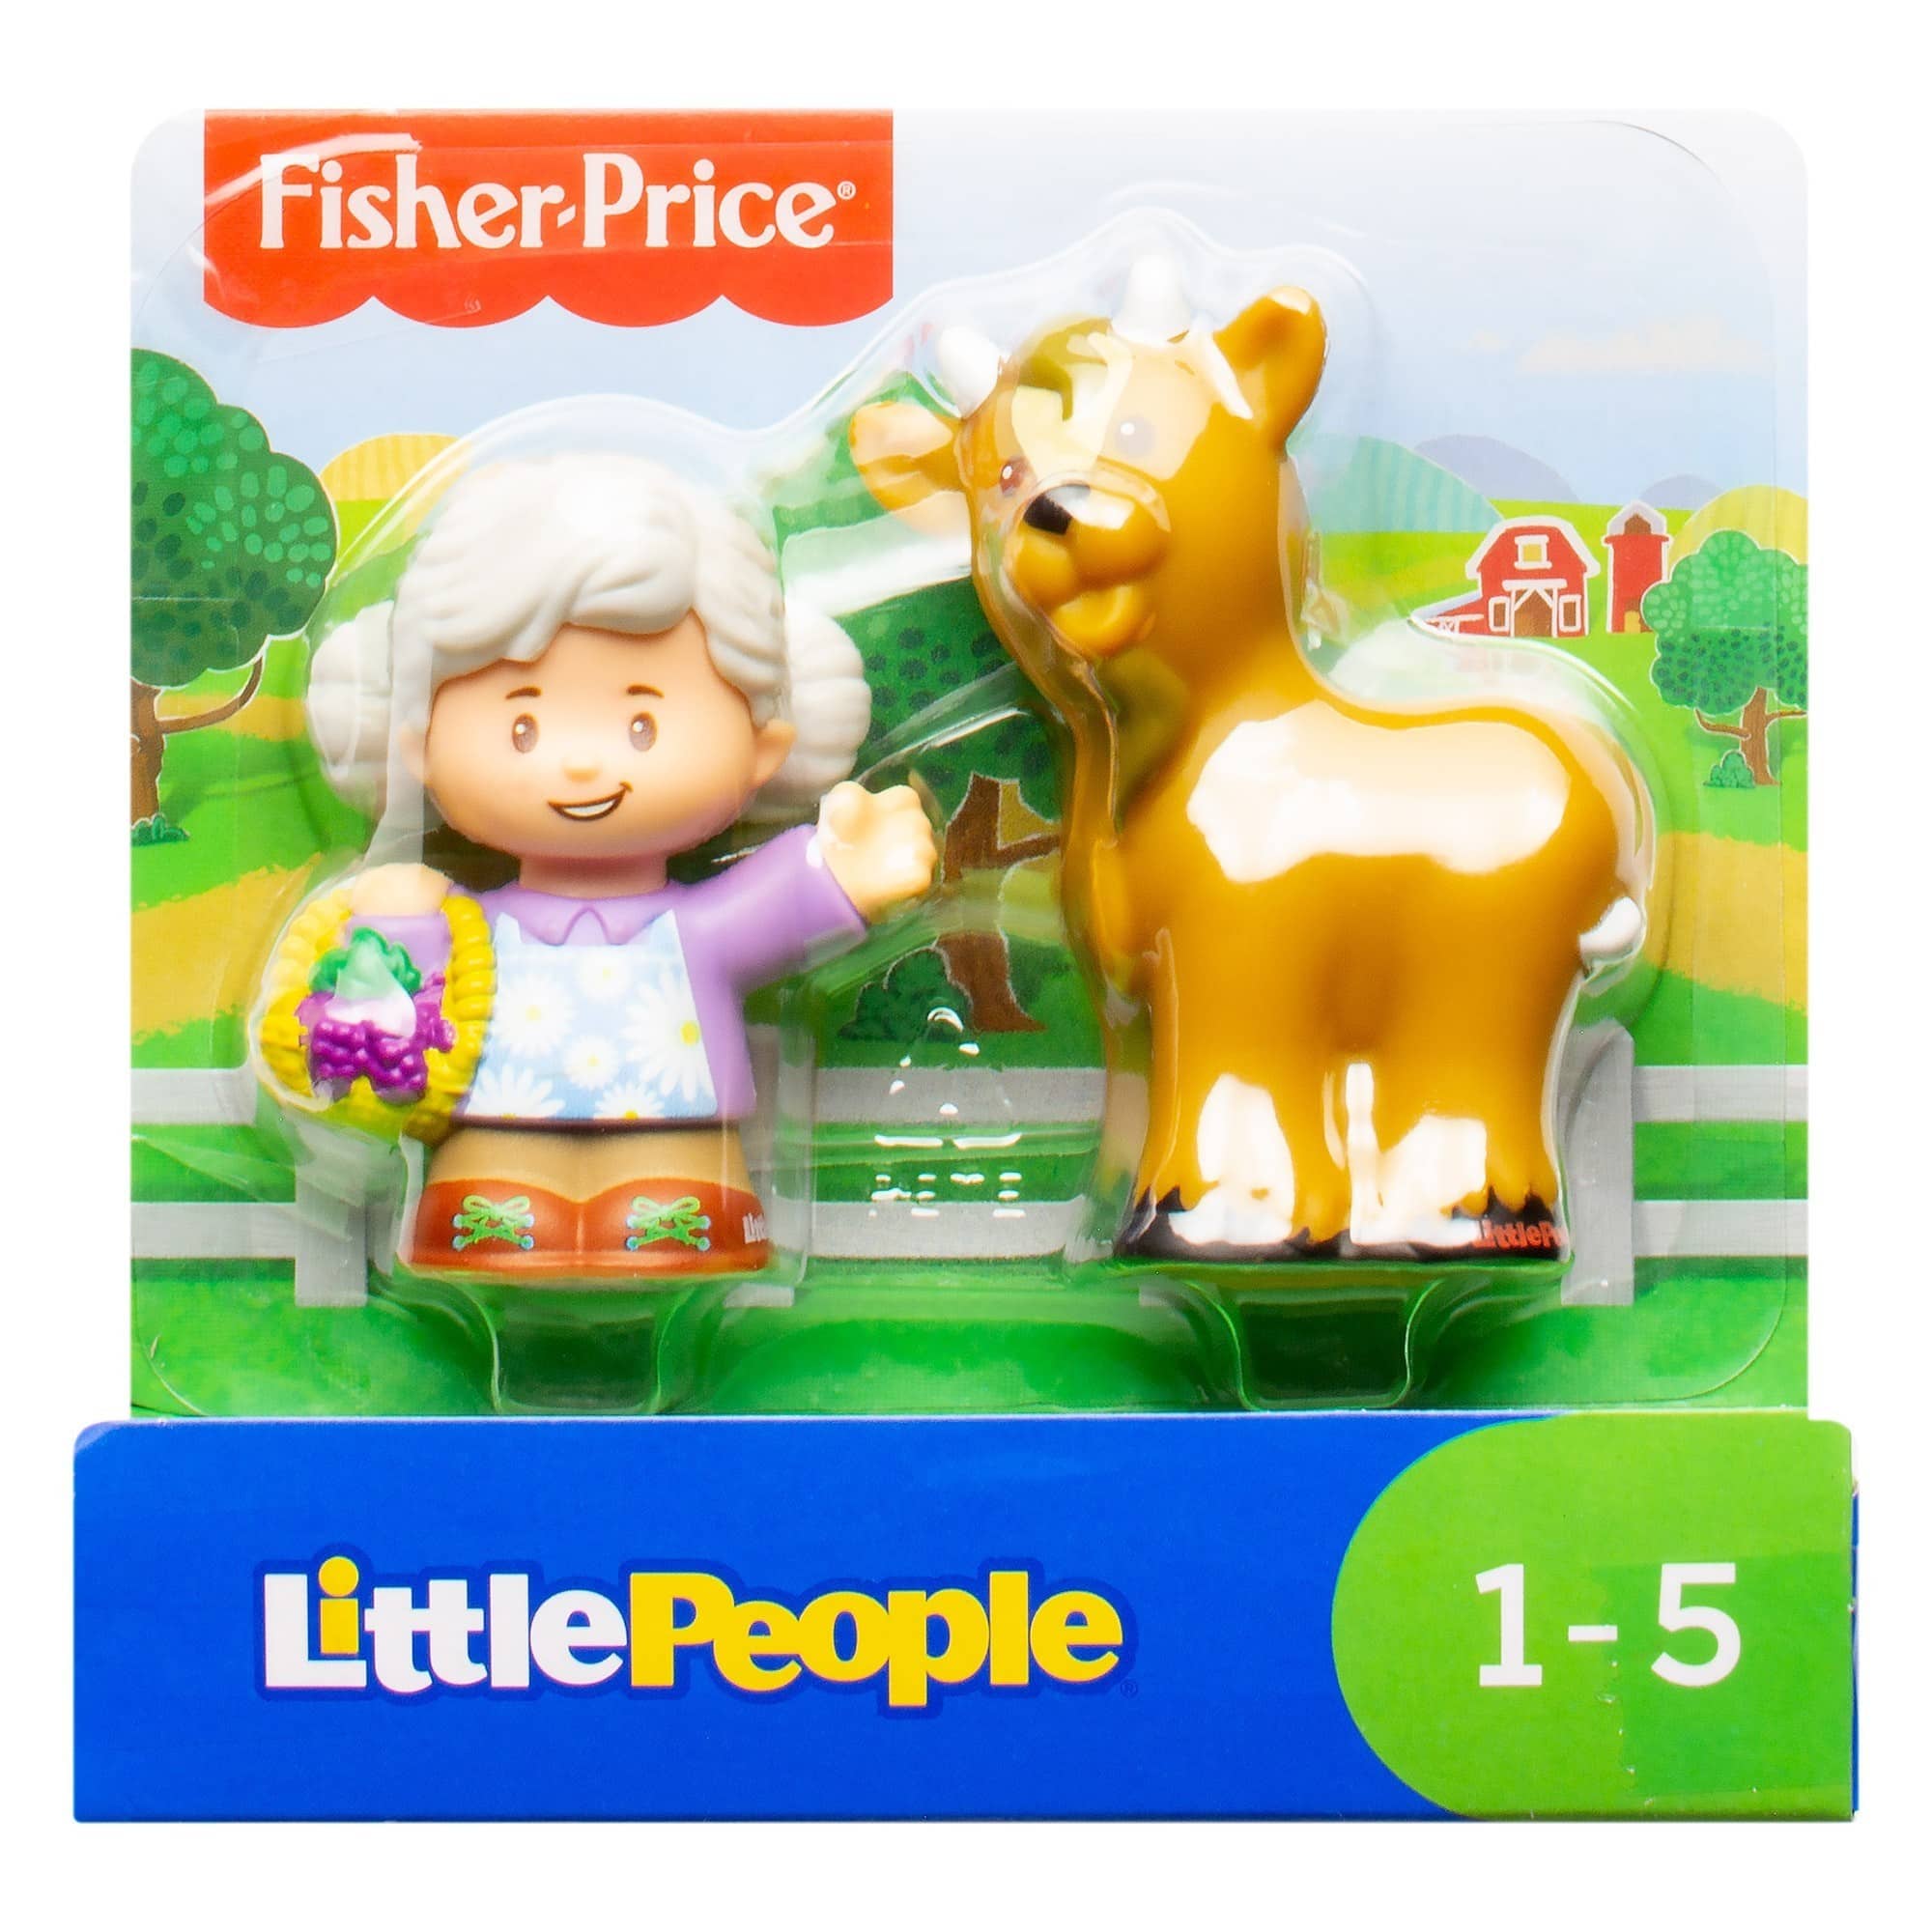 Fisher Price - Little People Figures - Grandma Helen and Goat